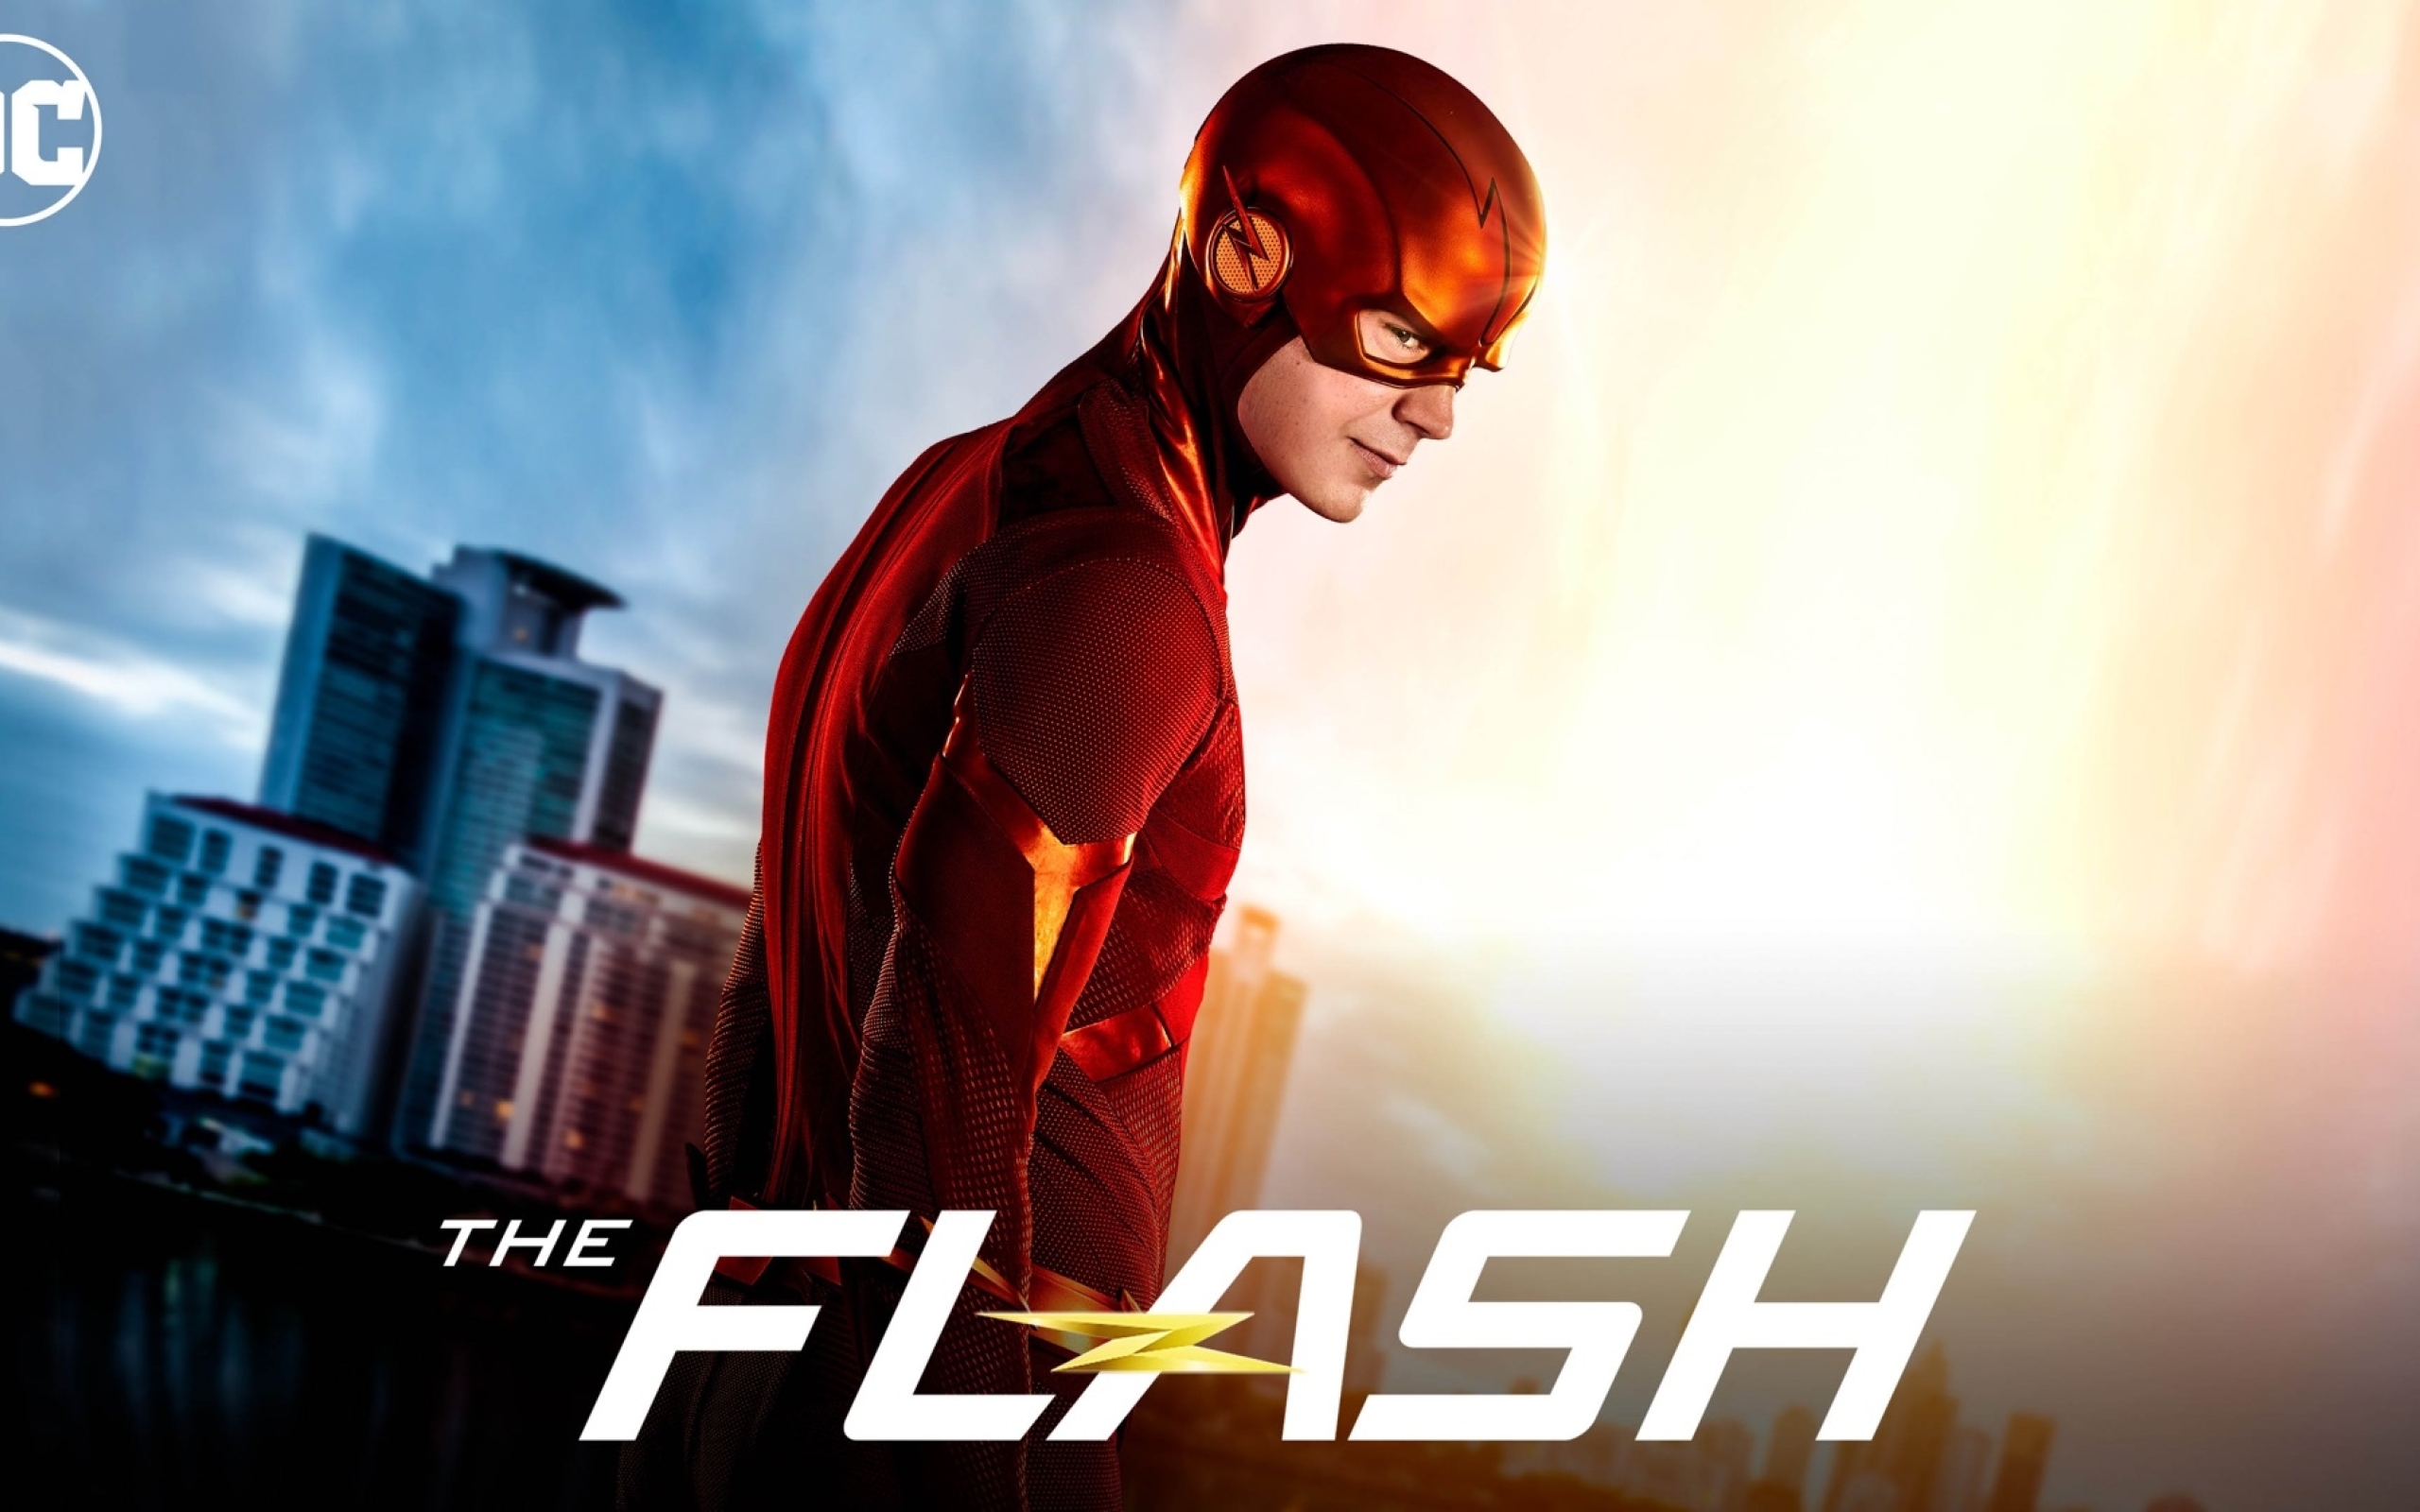 2560x1600 Resolution Poster of The Flash 2560x1600 Resolution Wallpaper ...